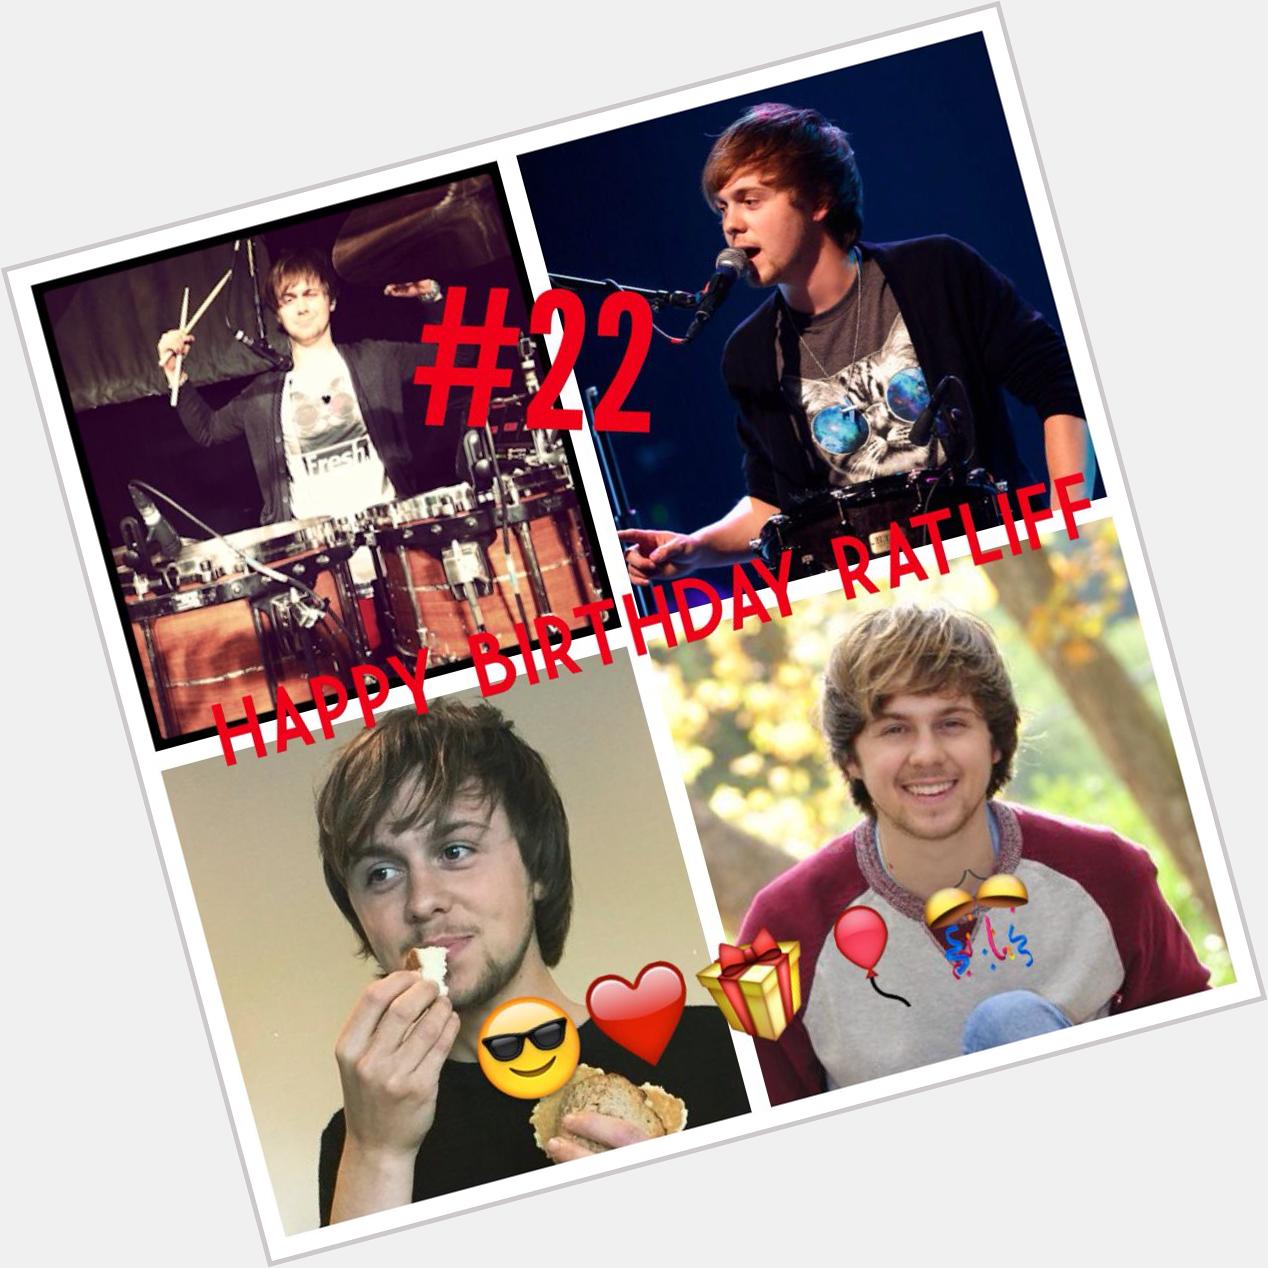 Happy Birthday To the best Drummer,and the sweetest goofy fun loving guy! ELLINGTON RATLIFF Have a great day babe    